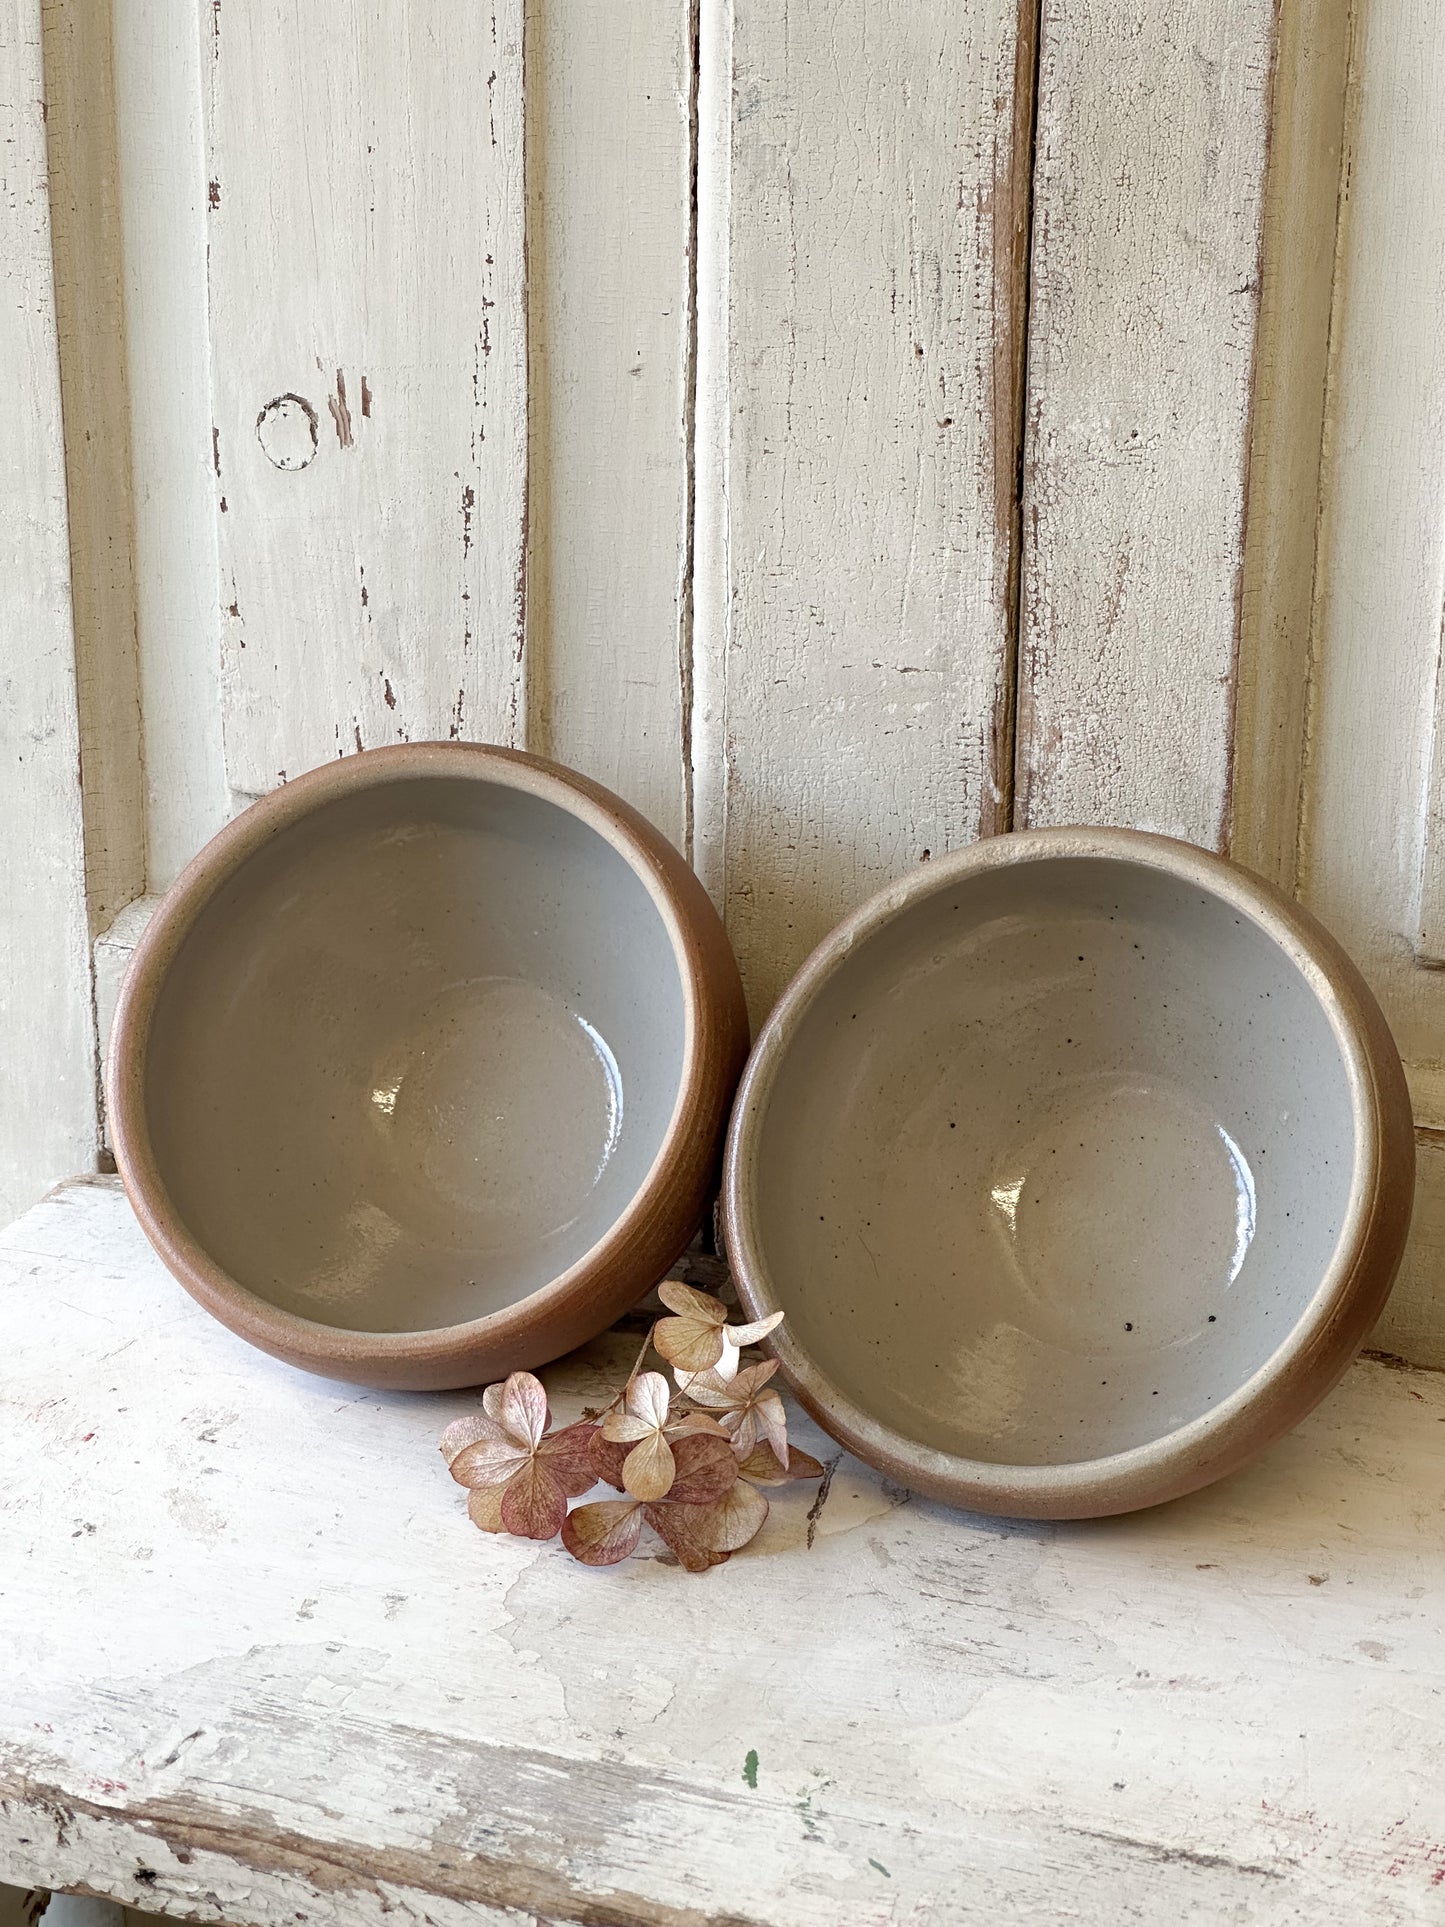 A pair of rustic antique French stoneware bowls